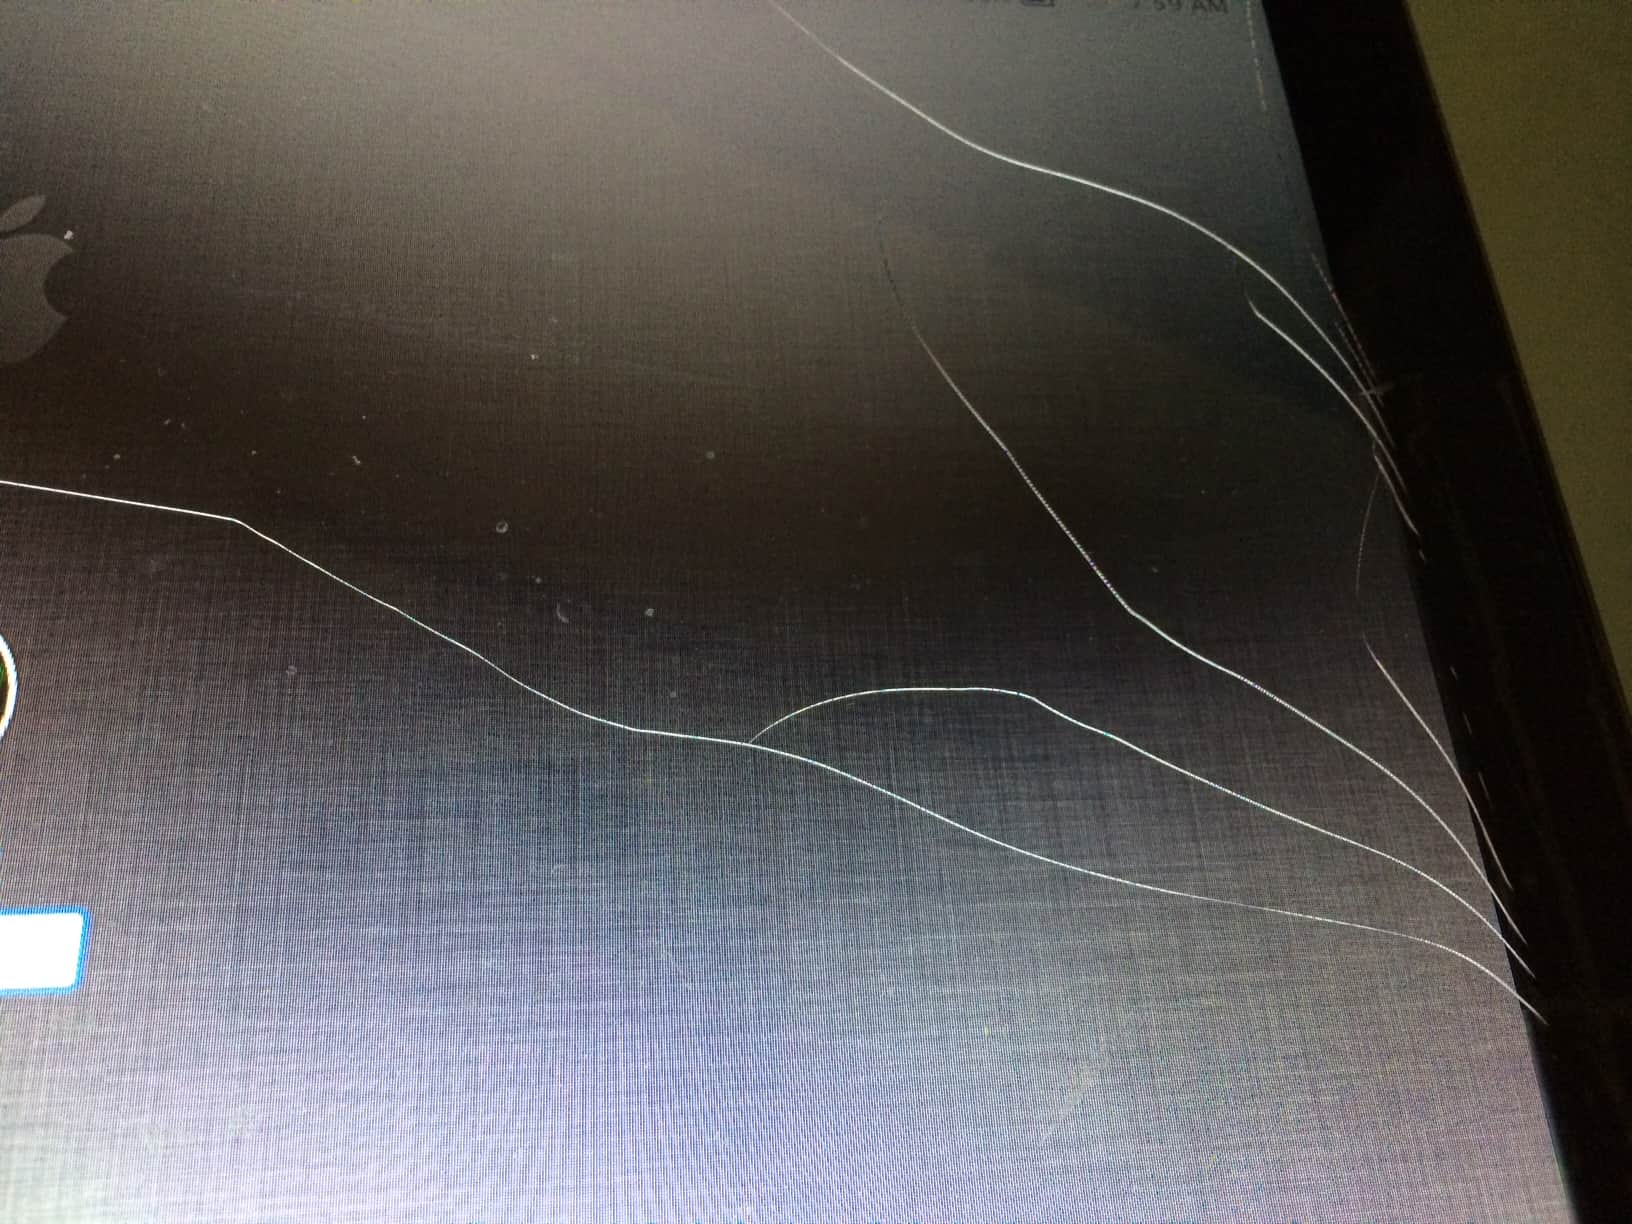 MacBook Pro with cracked glass